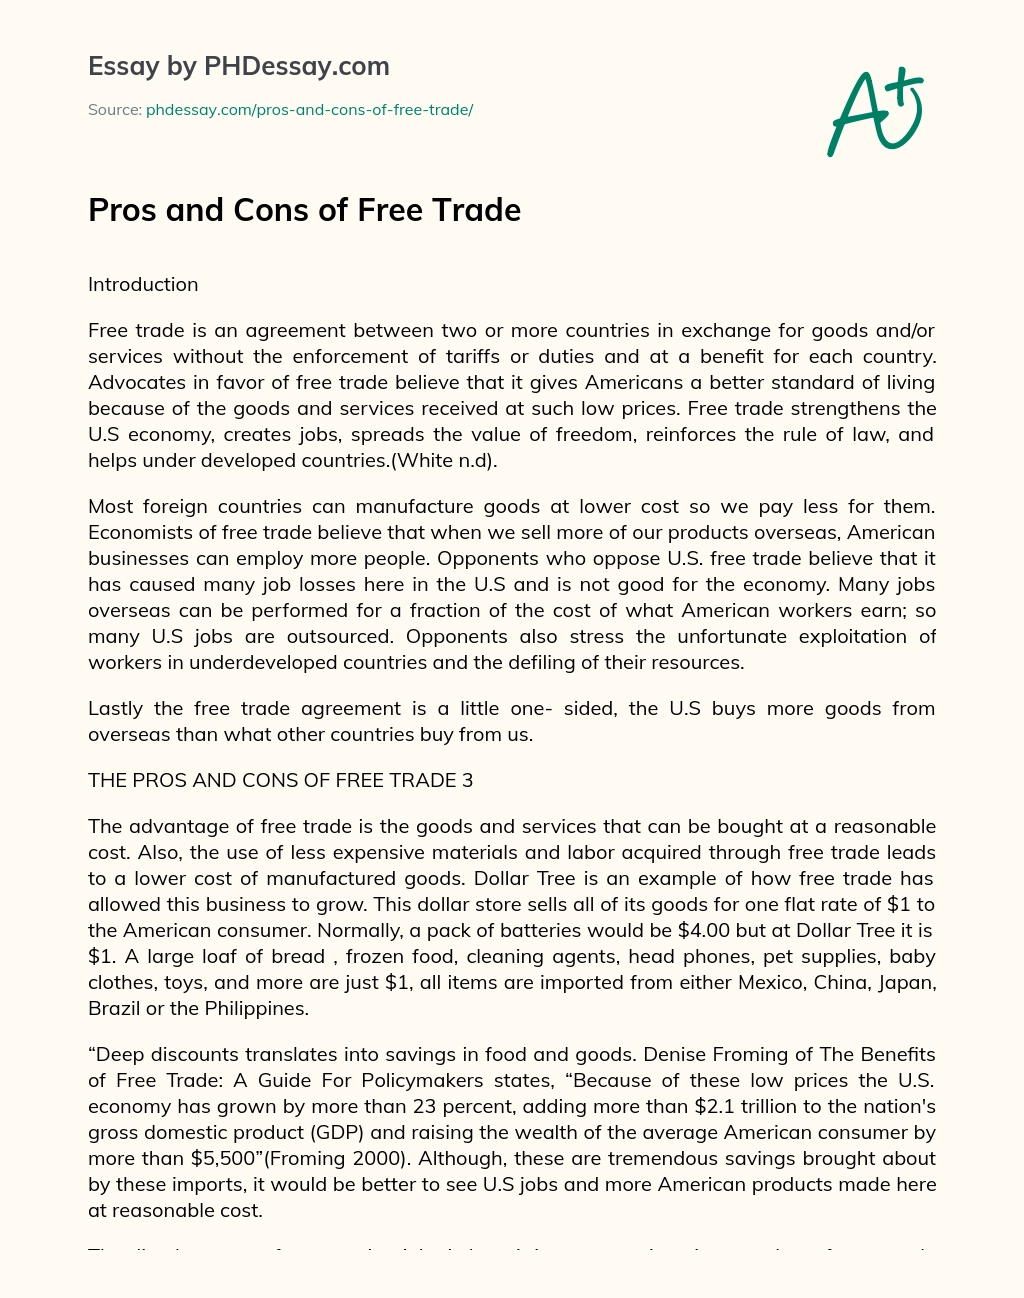 Pros and Cons of Free Trade essay